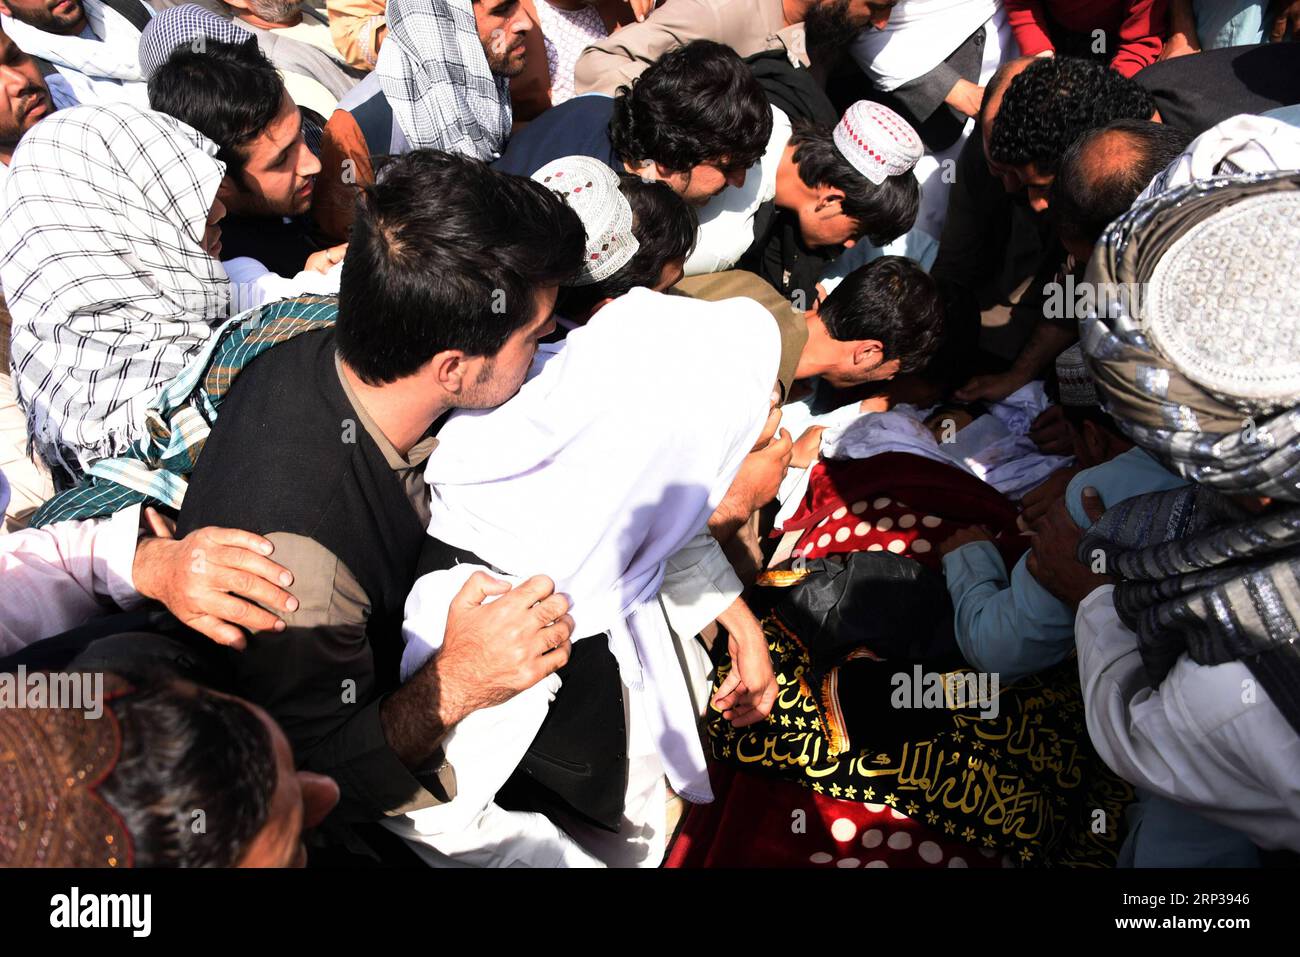 (180926) -- KANDAHAR, Sept. 26, 2018 -- Relatives and friends carry the coffin of Mohammad Nasir Mubaraz, an election candidate for Lower House of parliament election who was killed by gunmen in Kandahar province, Afghanistan, on Sept. 26, 2018. Mohammad Nasir Mubaraz was shot and killed by gunmen in Afghanistan s southern province of Kandahar Tuesday night, a provincial government spokesman said Wednesday. ) (qxy) AFGHANISTAN-KANDAHAR-FUNERAL-ELECTION CANDIDATE SanaullahxSeiam PUBLICATIONxNOTxINxCHN Stock Photo